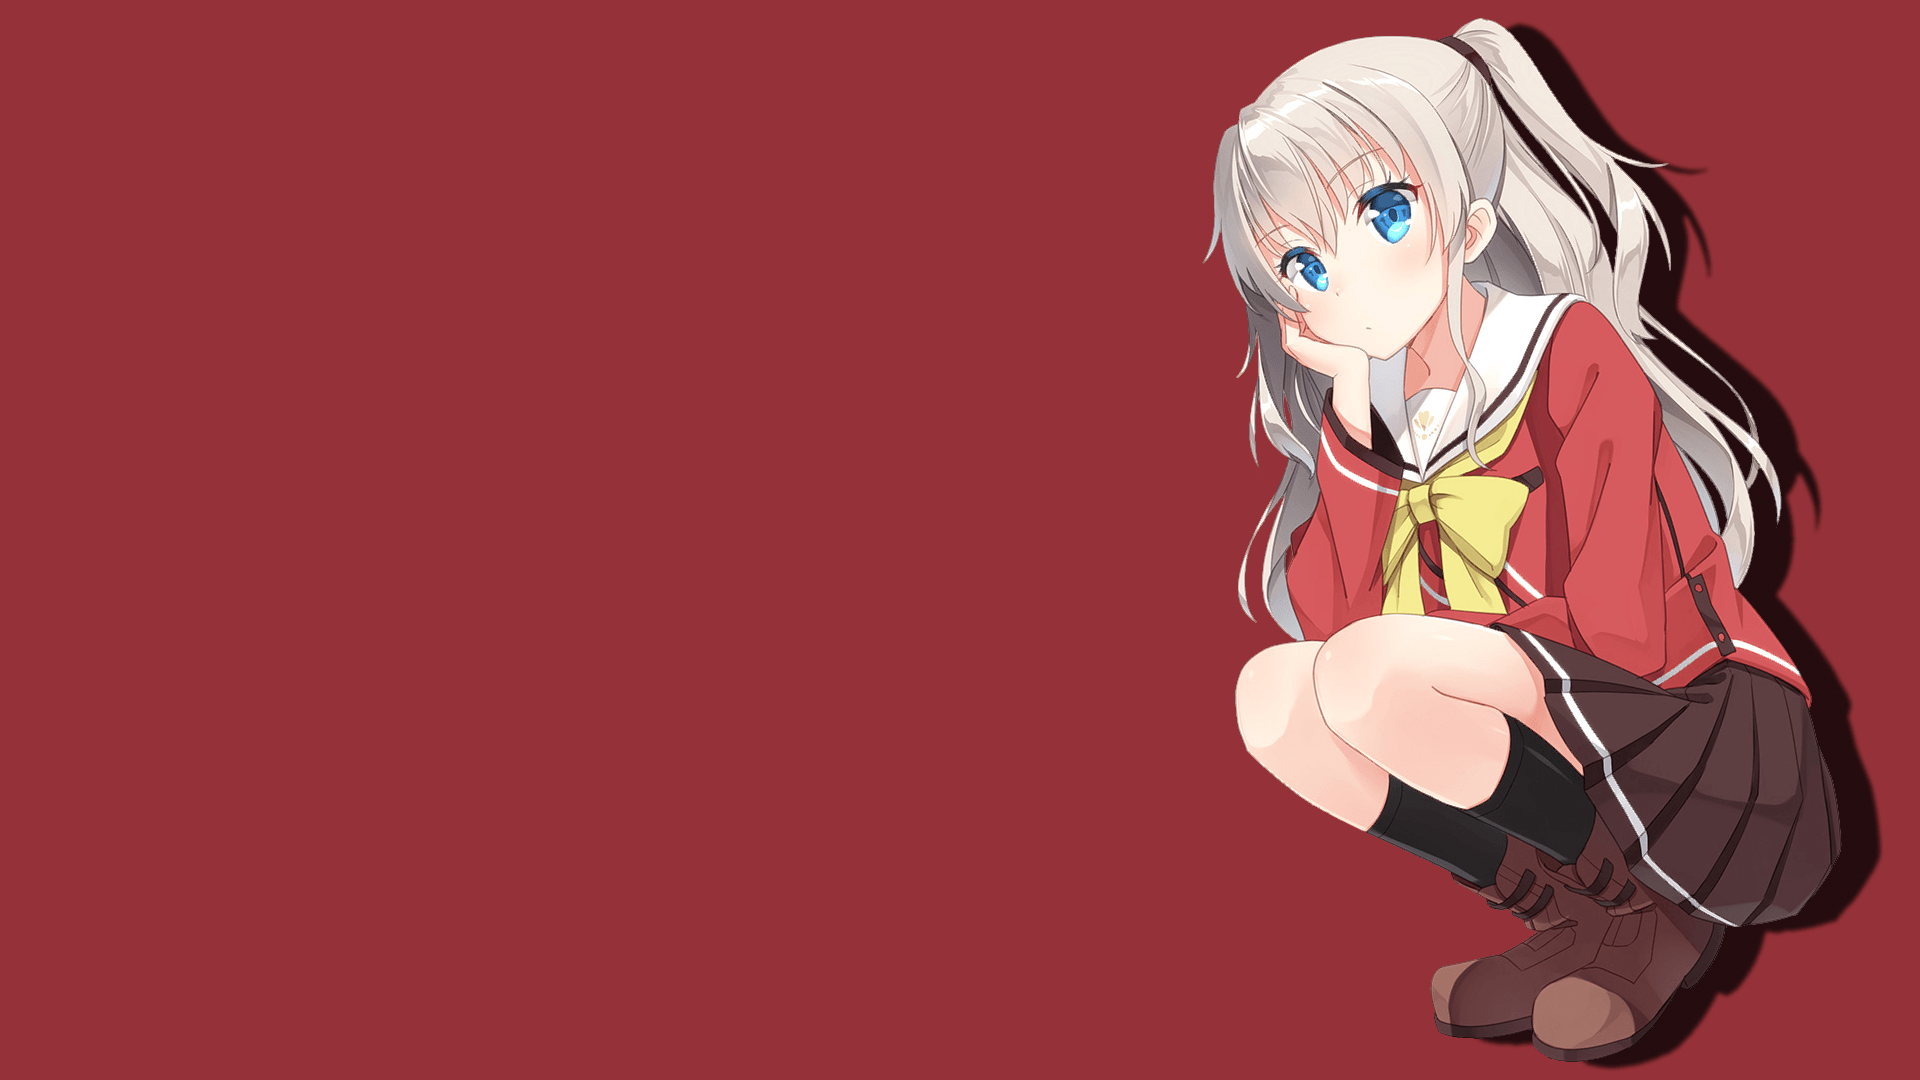 Anoyone has some wallpaper of Nao from Charlotte? :3